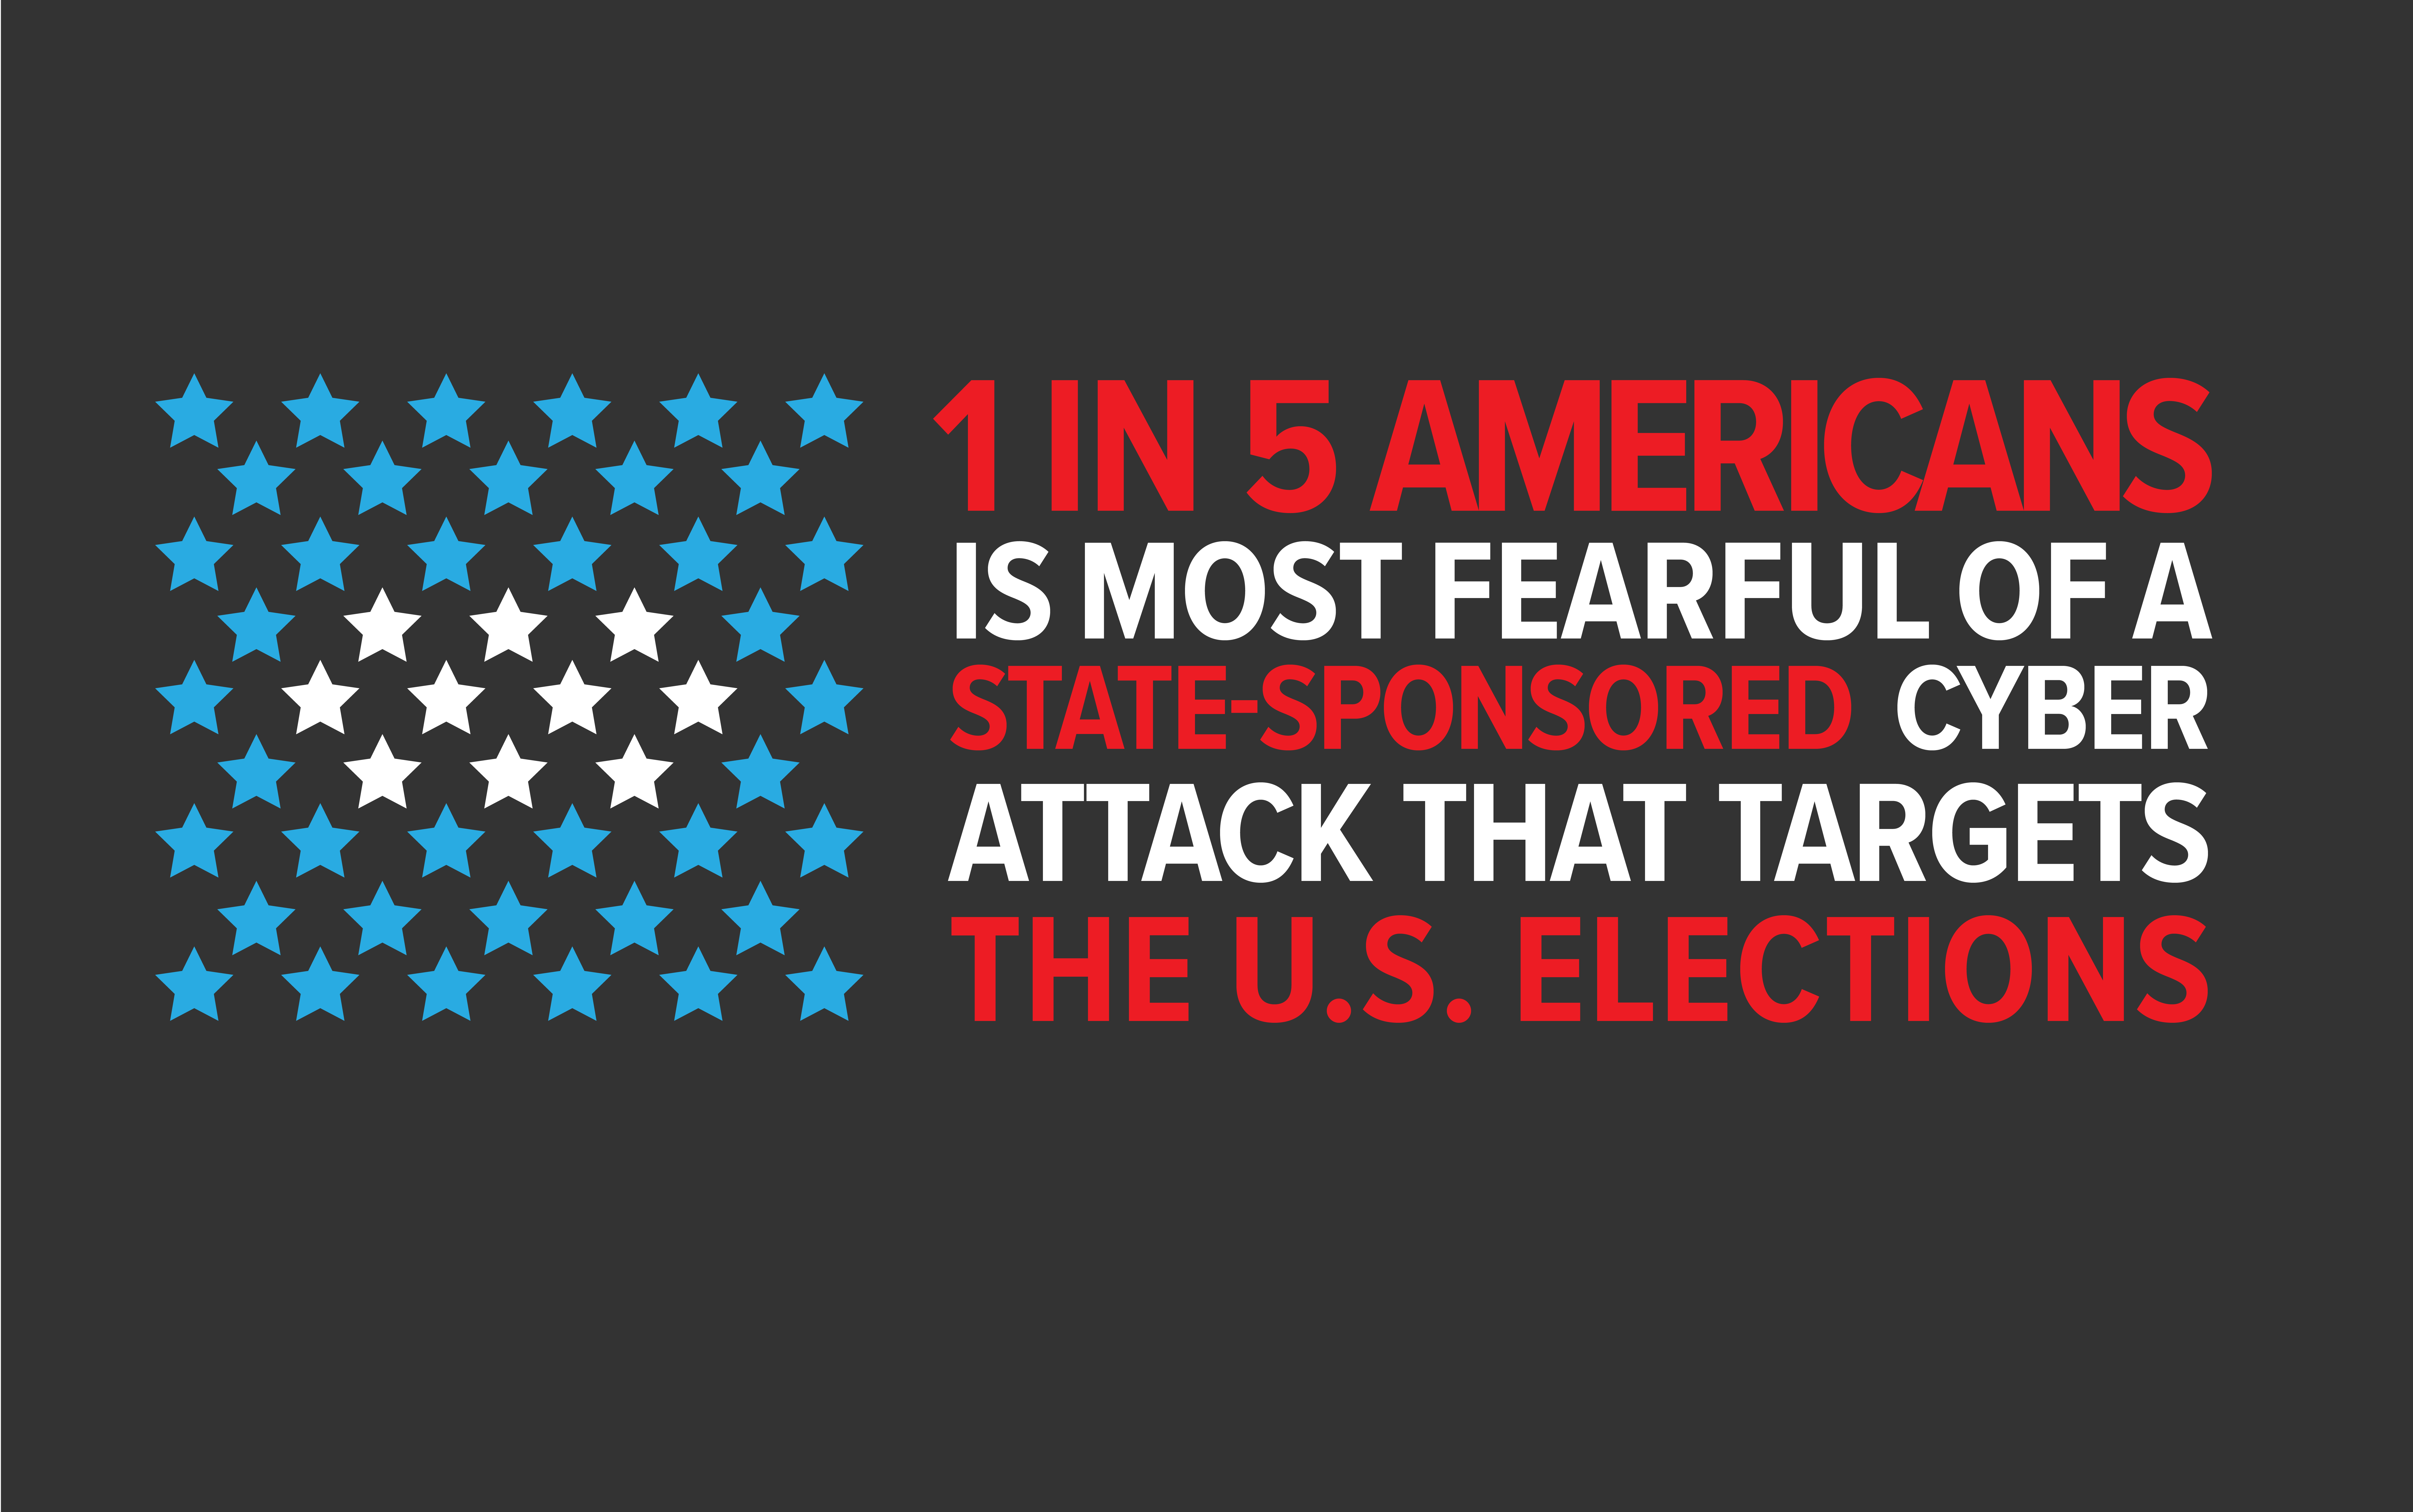 1 in 5 Americans is most fearful of a state-sponsored cyber attack that targets the U.S. elections